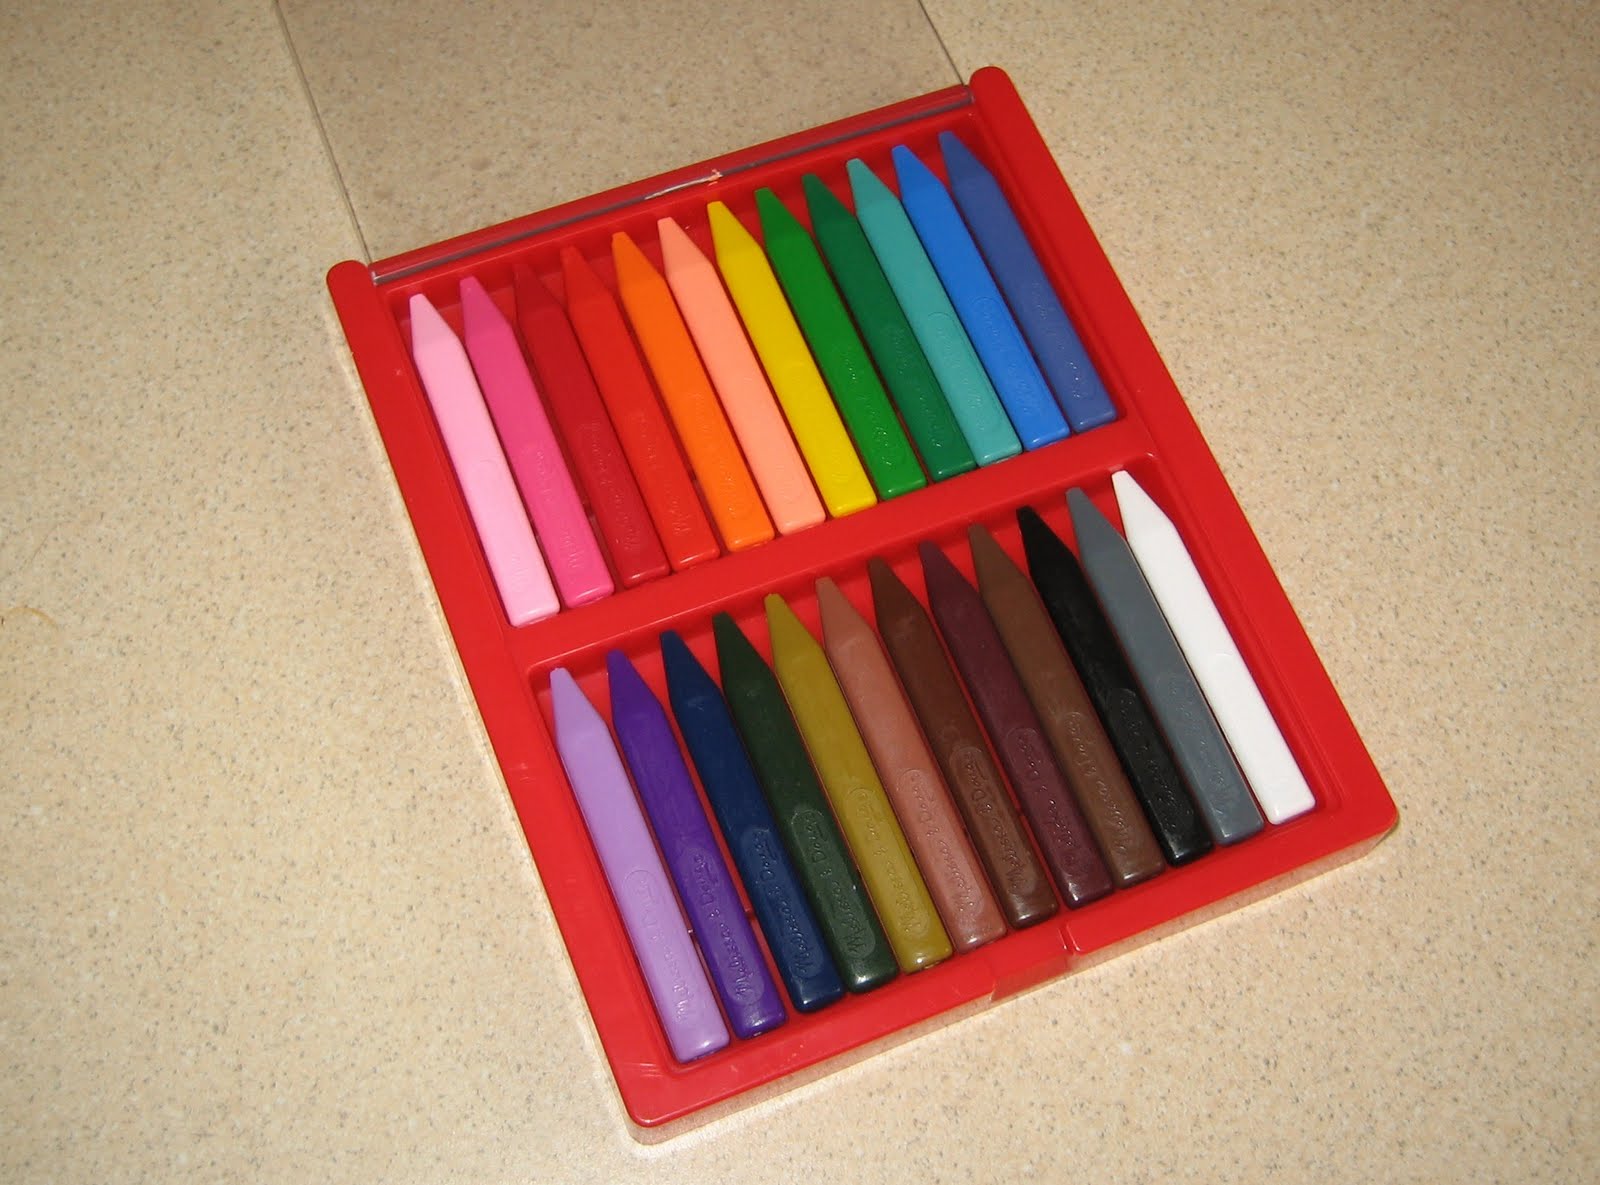 When Toys Rule The World: Toyologist Review: Triangular Crayon Set